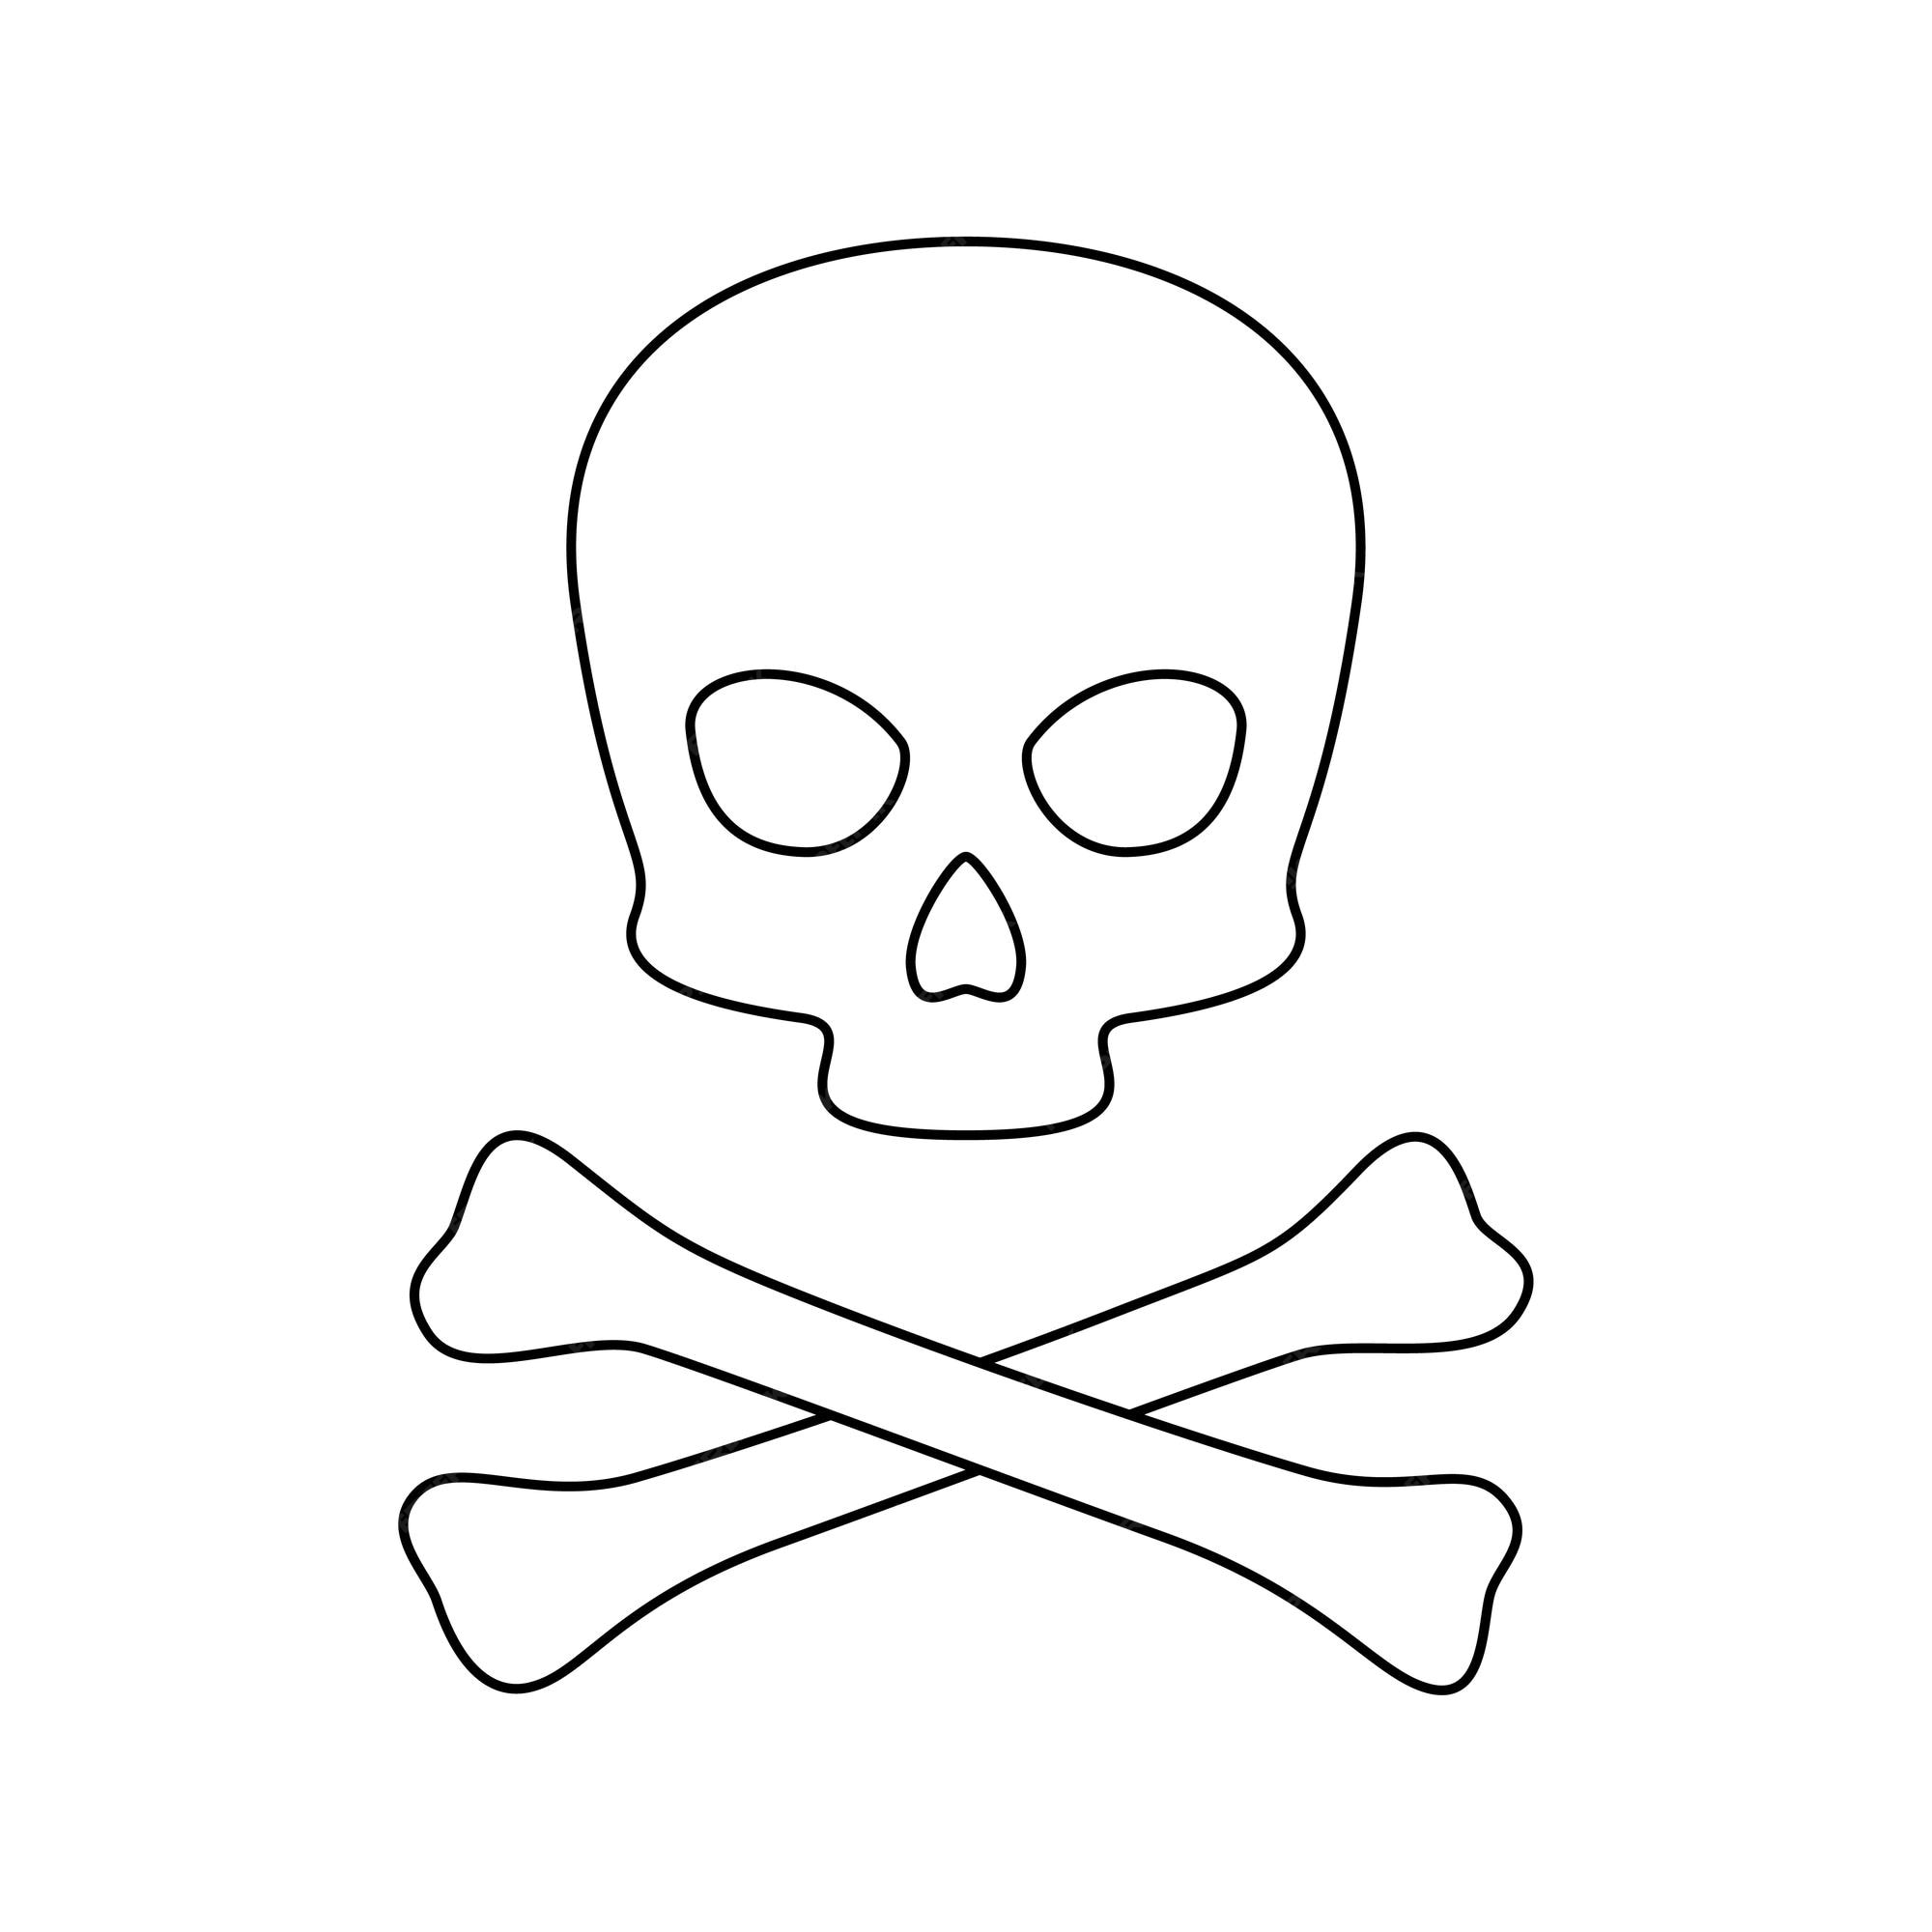 Premium vector coloring page with skull and crossbones for kids